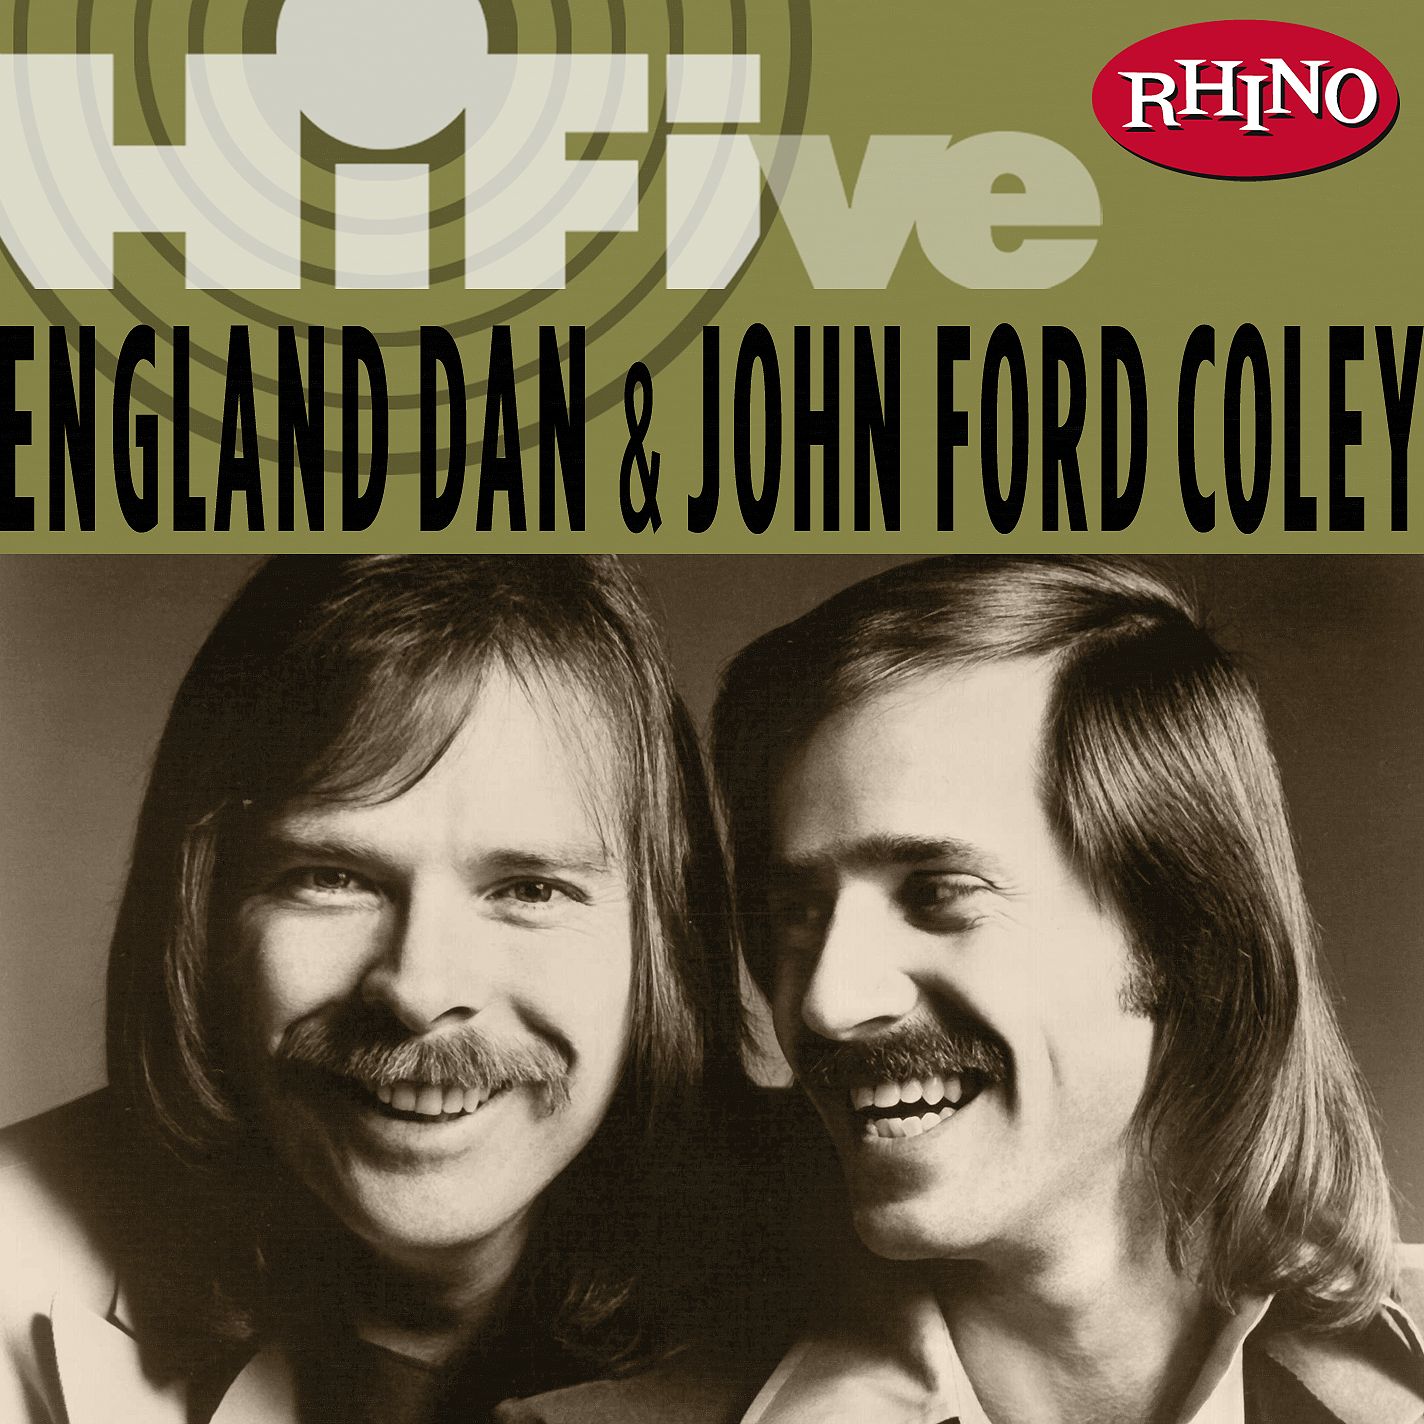 England dan and john ford coley greatest hits mp3 #8